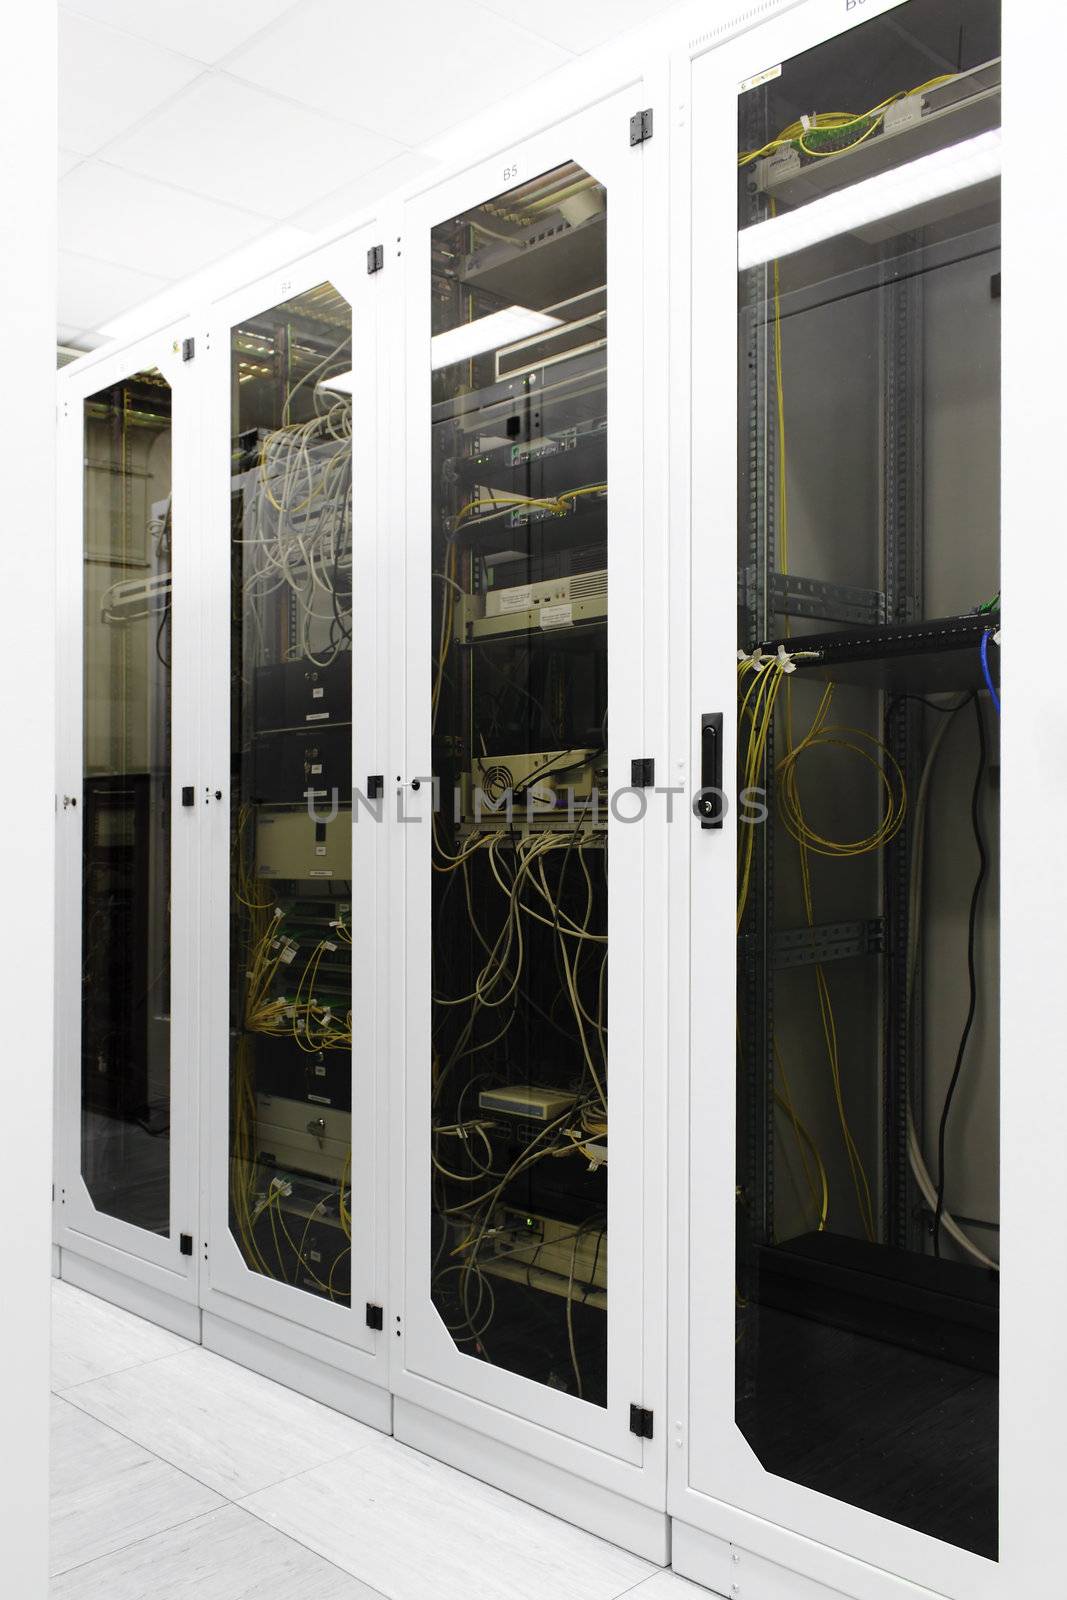 Racks with network equipment by artush